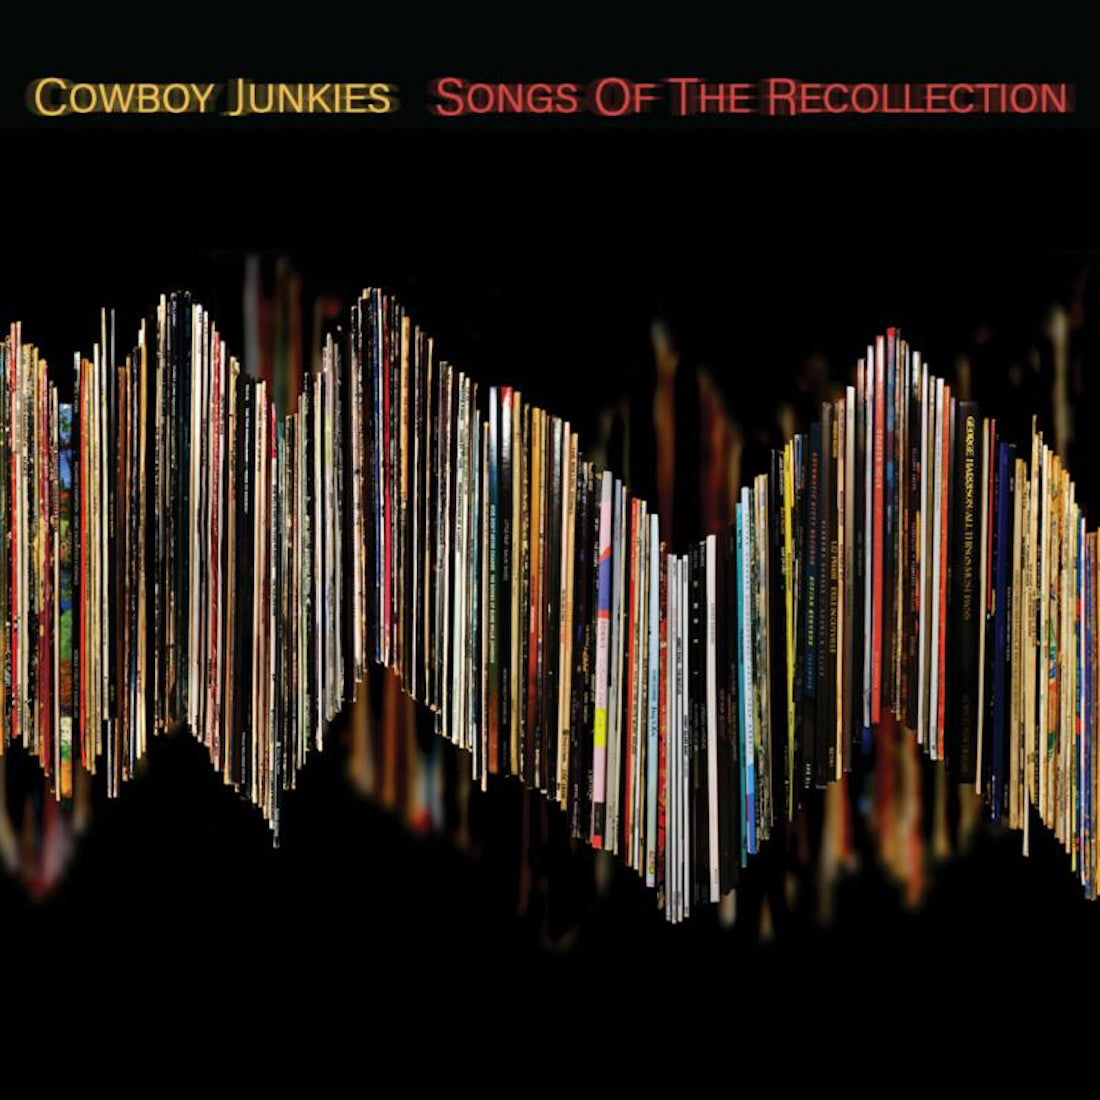  |  Vinyl LP | Cowboy Junkies - Songs of the Recollection (LP) | Records on Vinyl